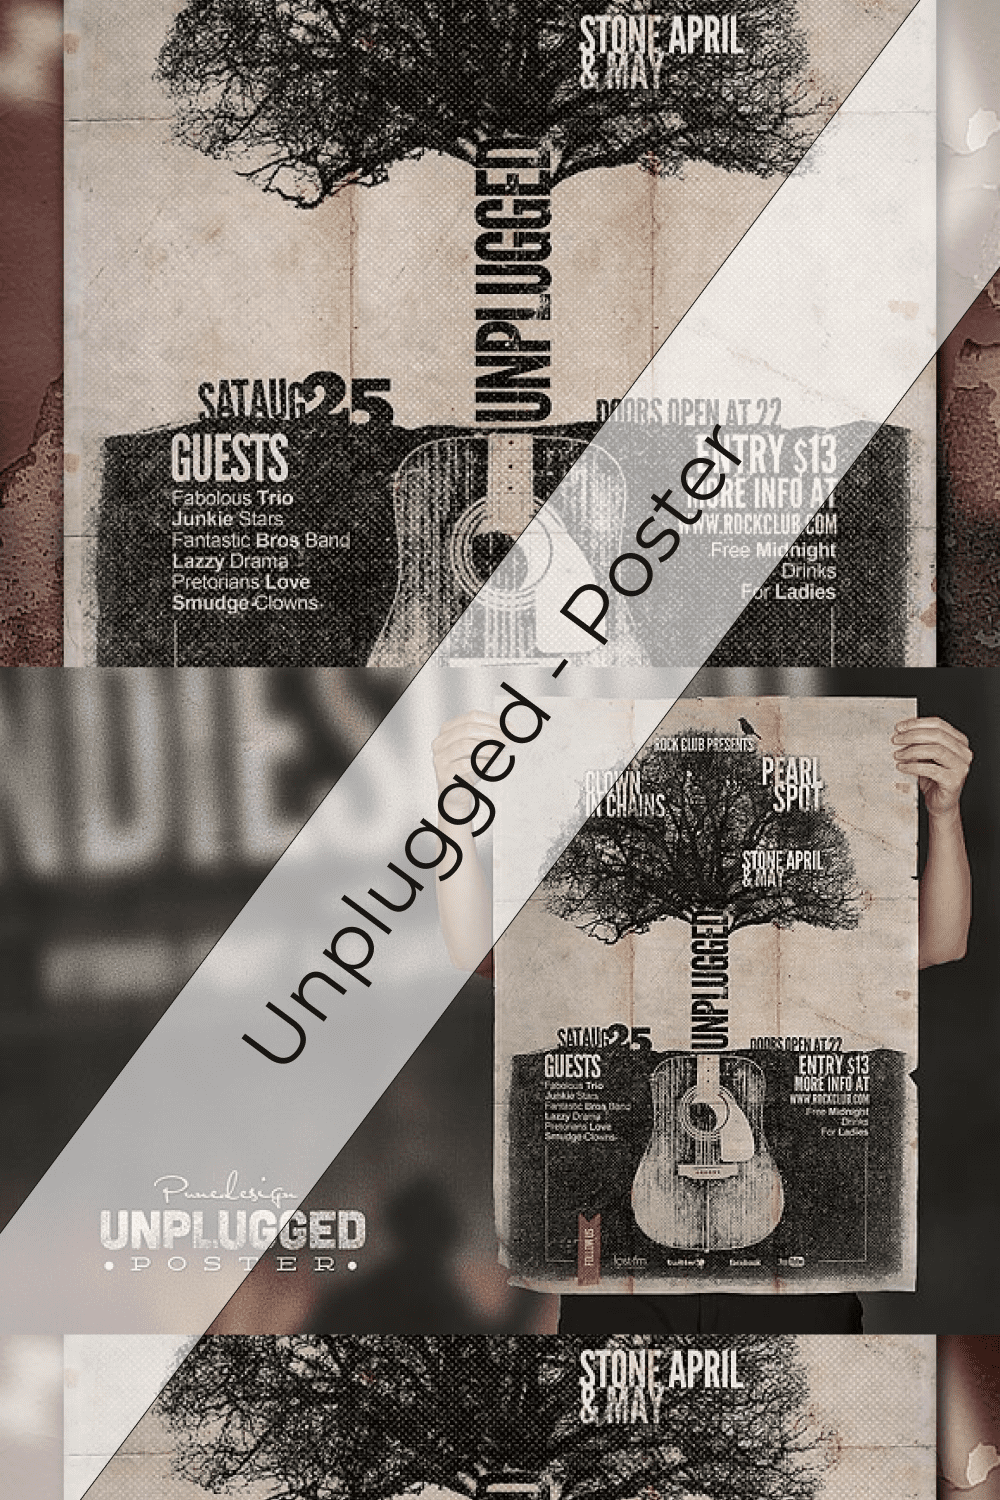 Unplugged Poster Pinterest image.